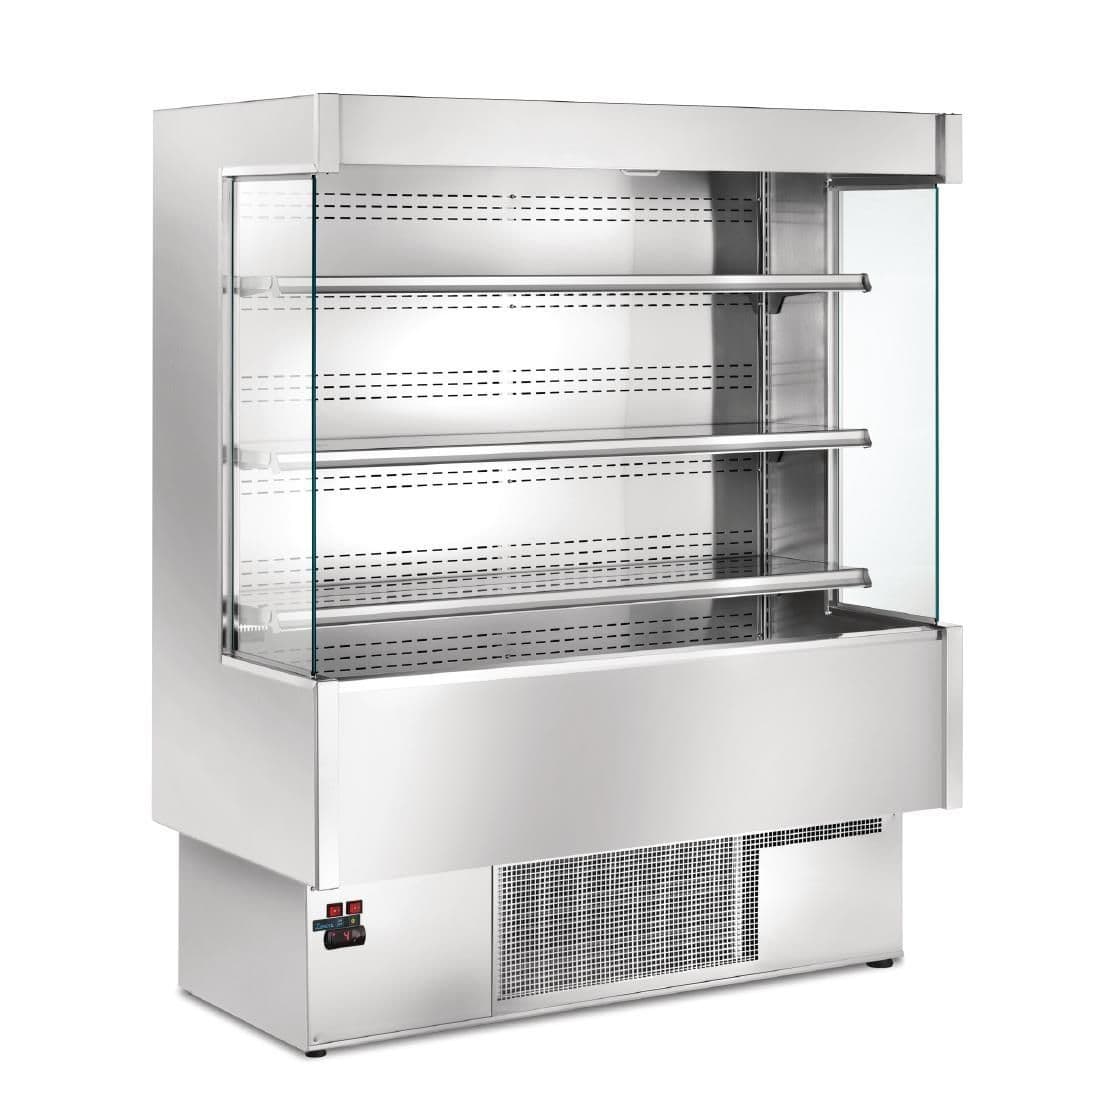 DE840-100 Zoin Silver SI Multi Deck Display Chiller 1000mm SI100B JD Catering Equipment Solutions Ltd